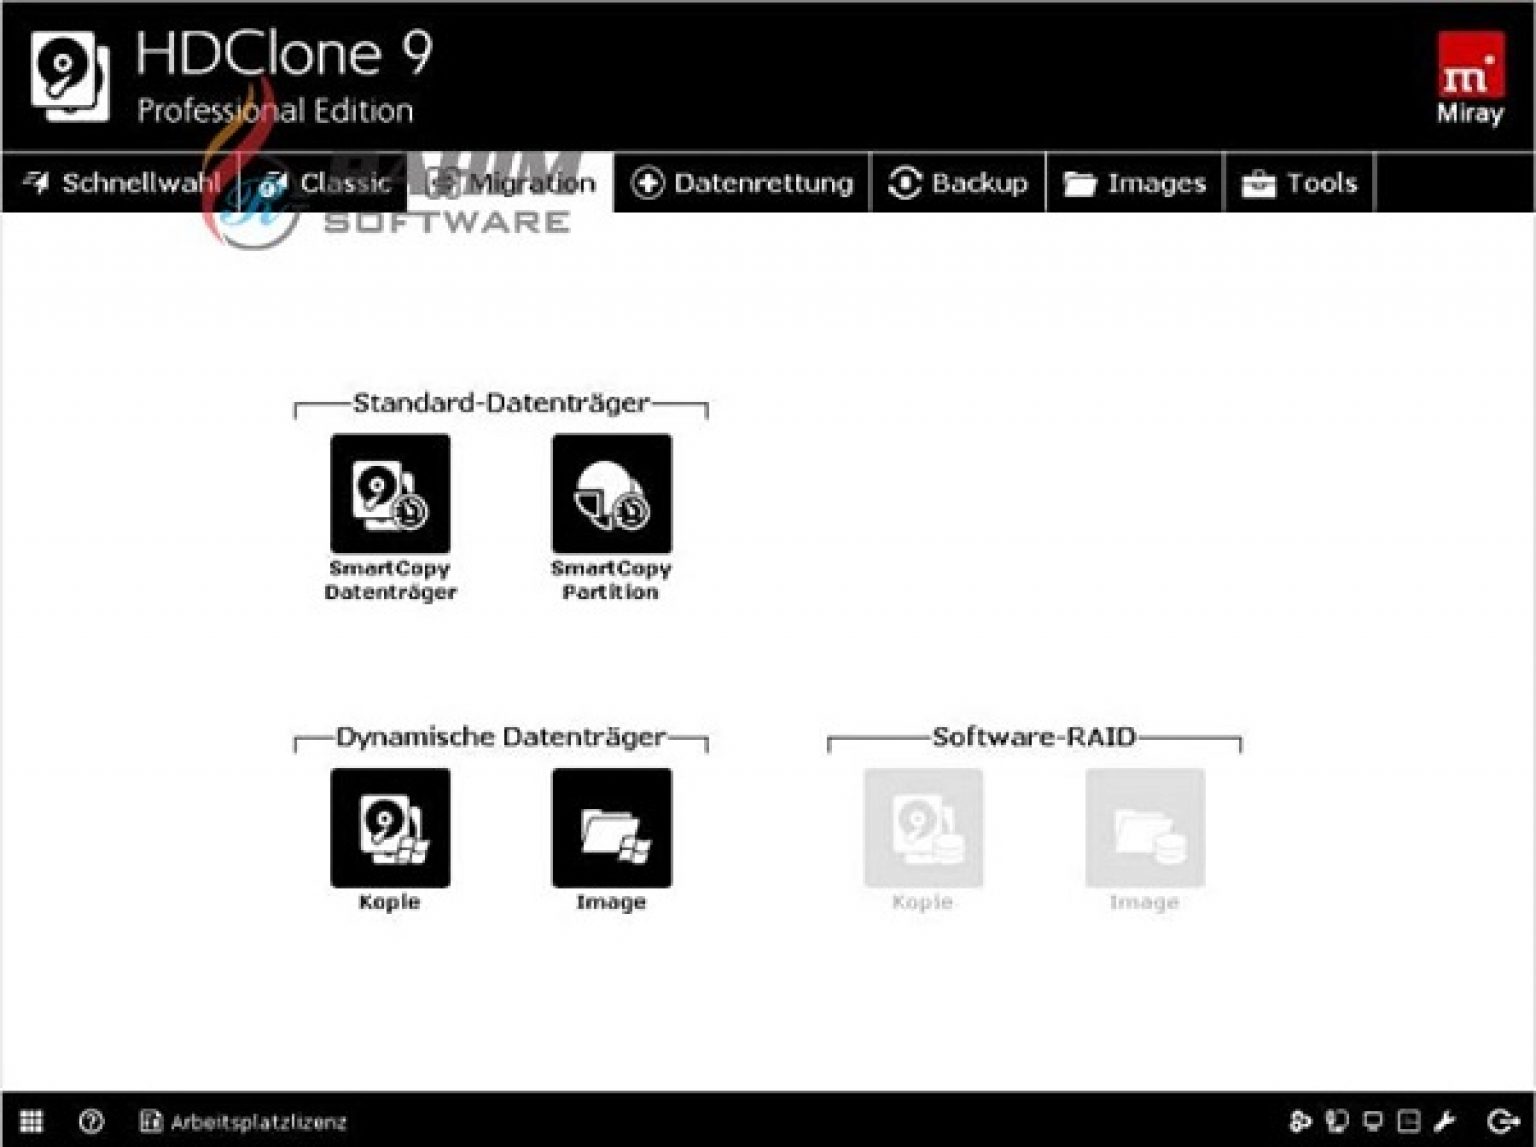 hdclone portable download